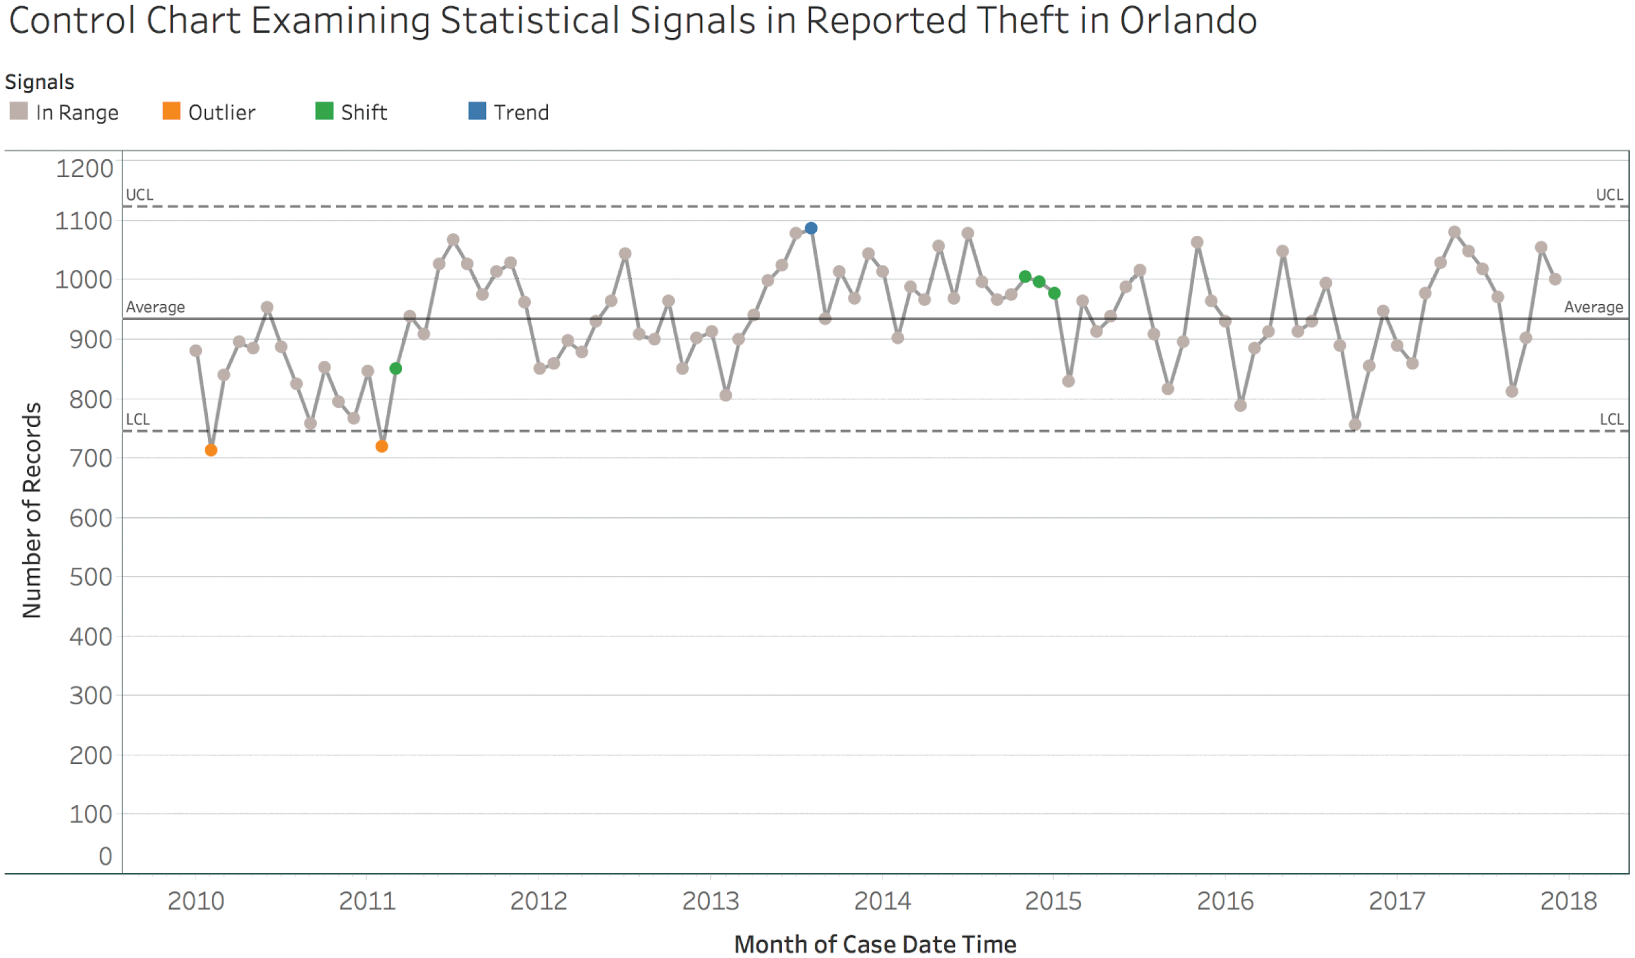 An individuals control chart examining statistical signals in the time series of reported thefts in Orlando, from the year 2010 to 2018.